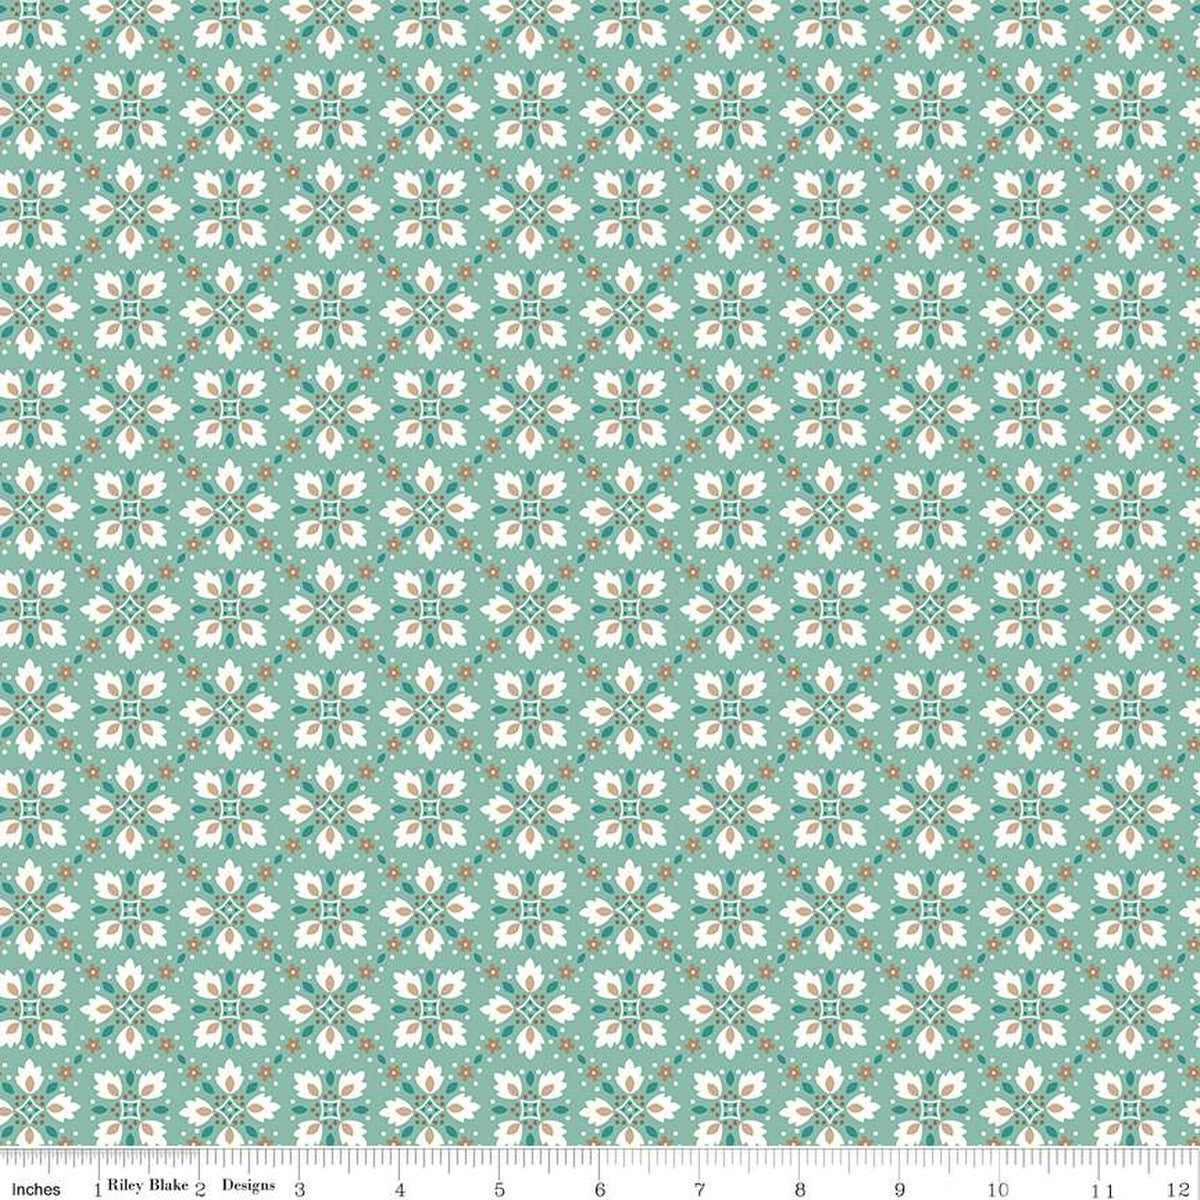 sea green geometric pattern that looks a bit like tiles on the diagonal with white petals and red dots